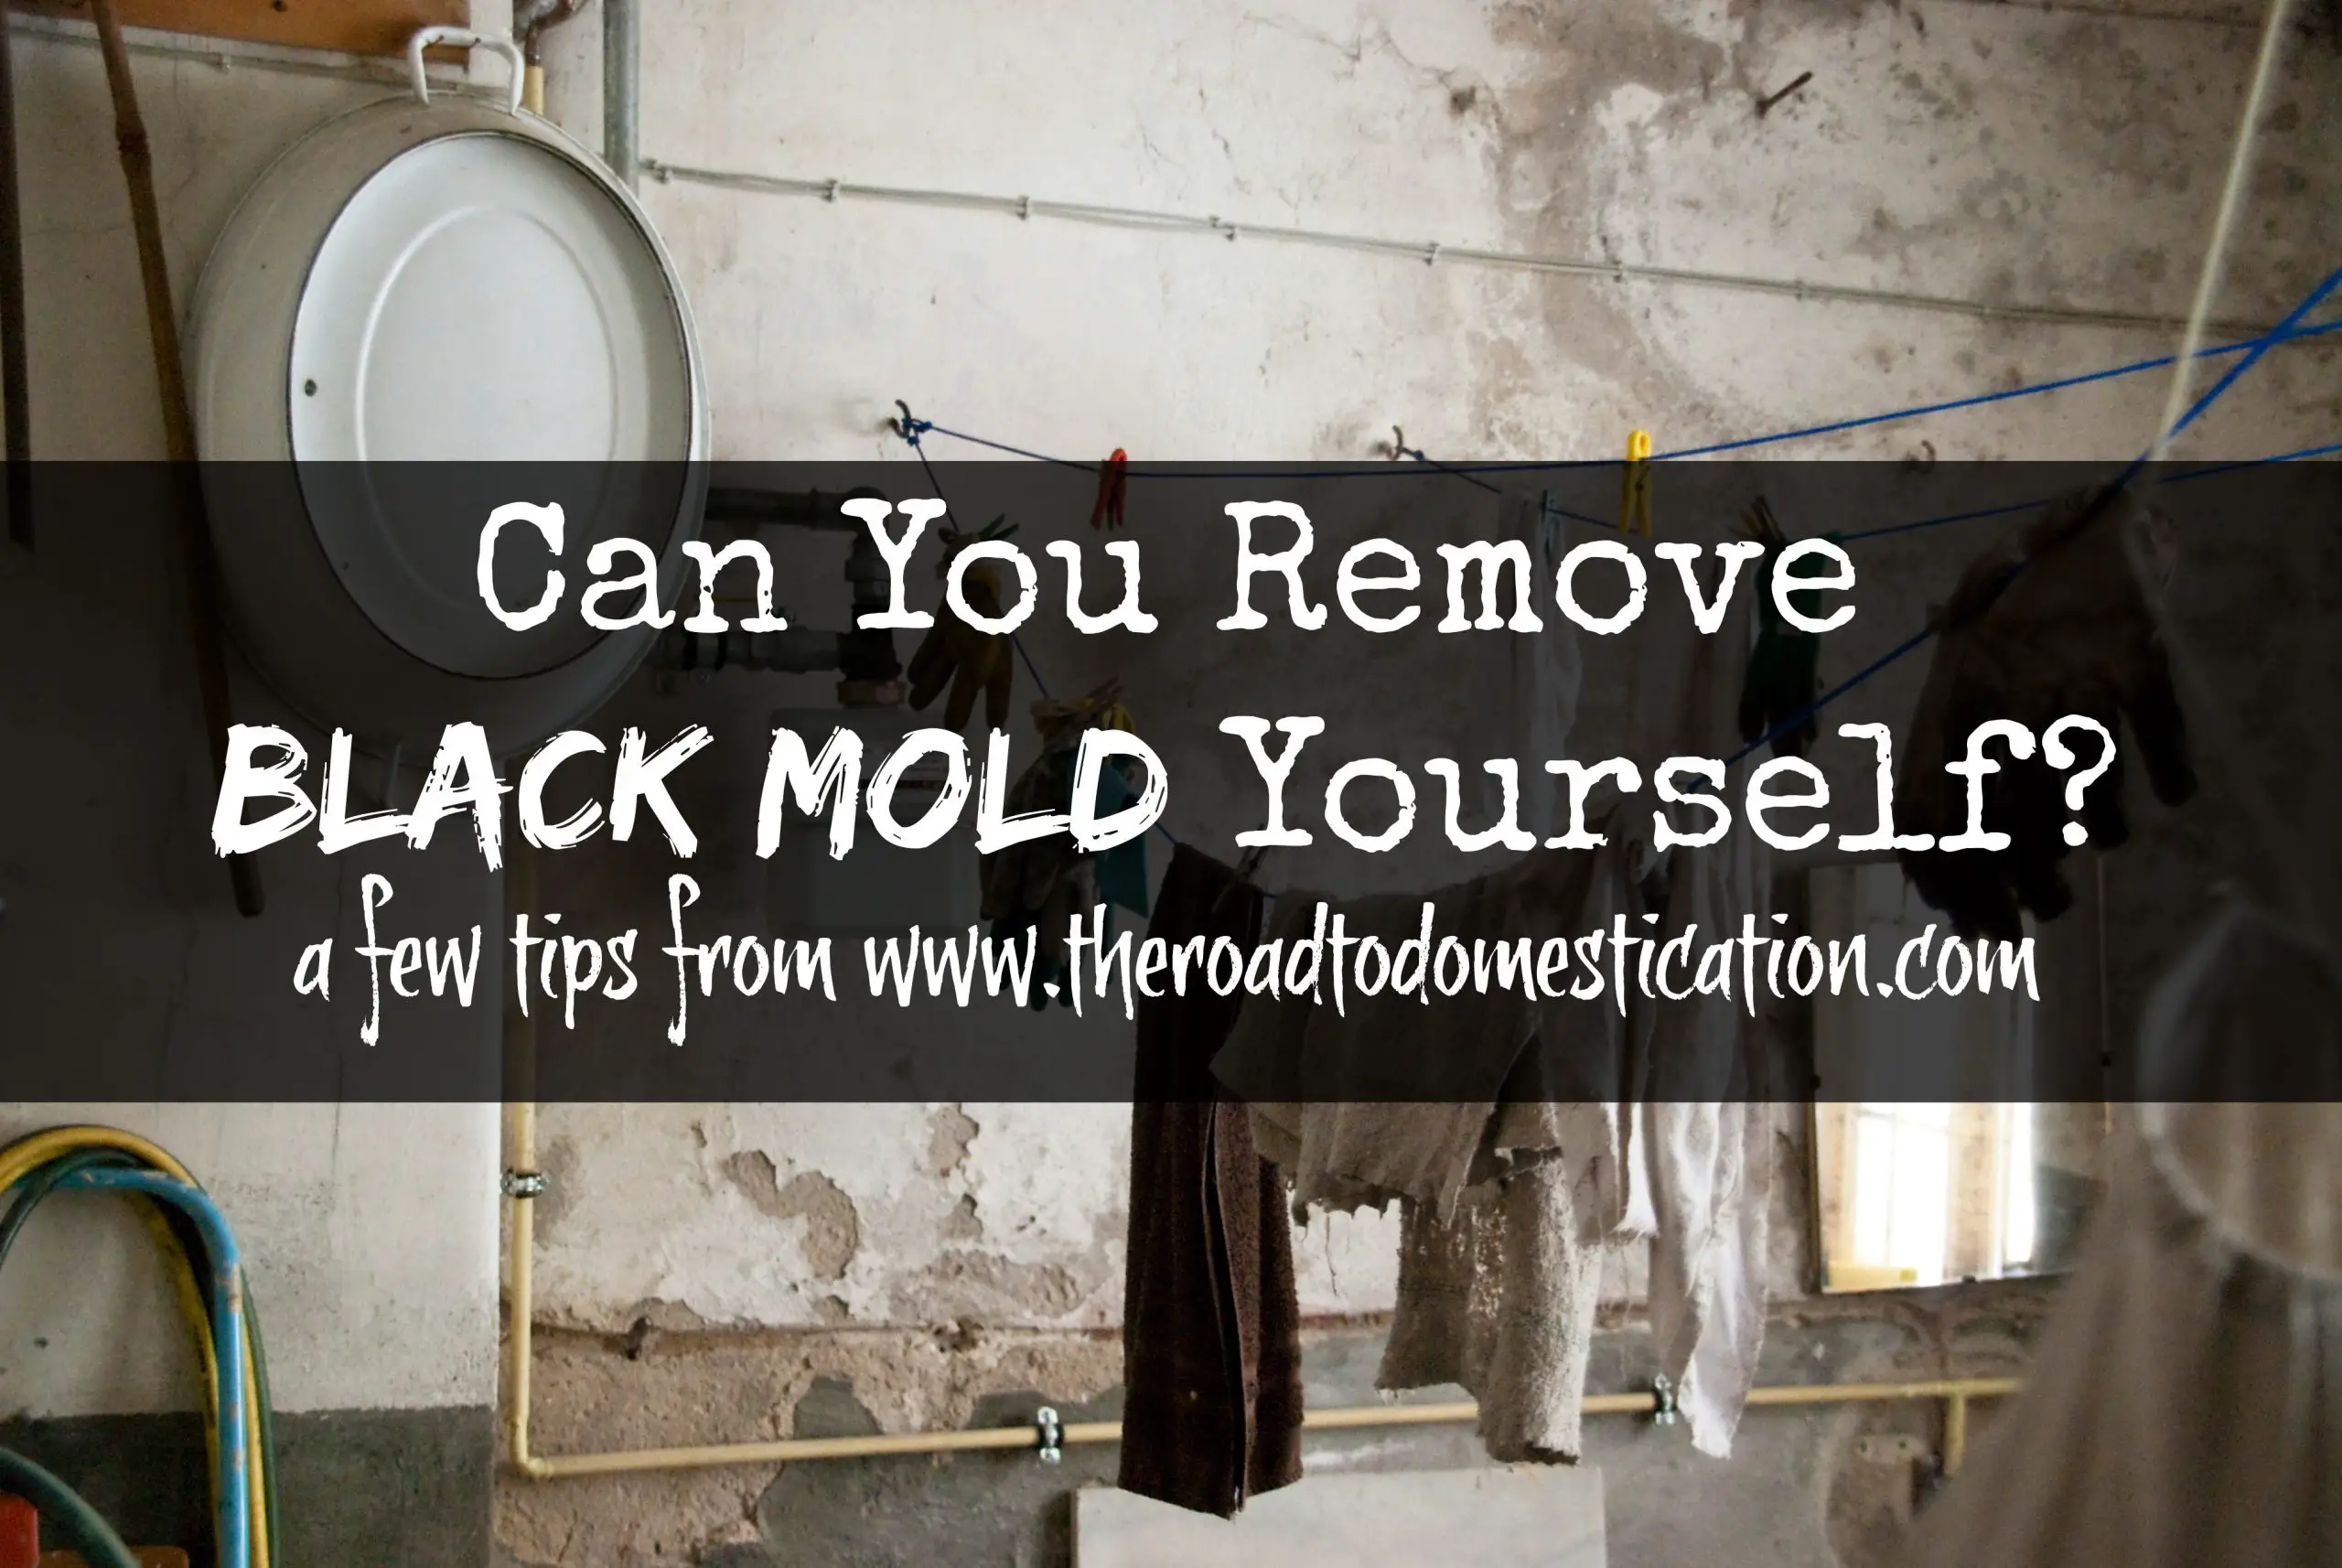 Can You Remove Black Mold Yourself?